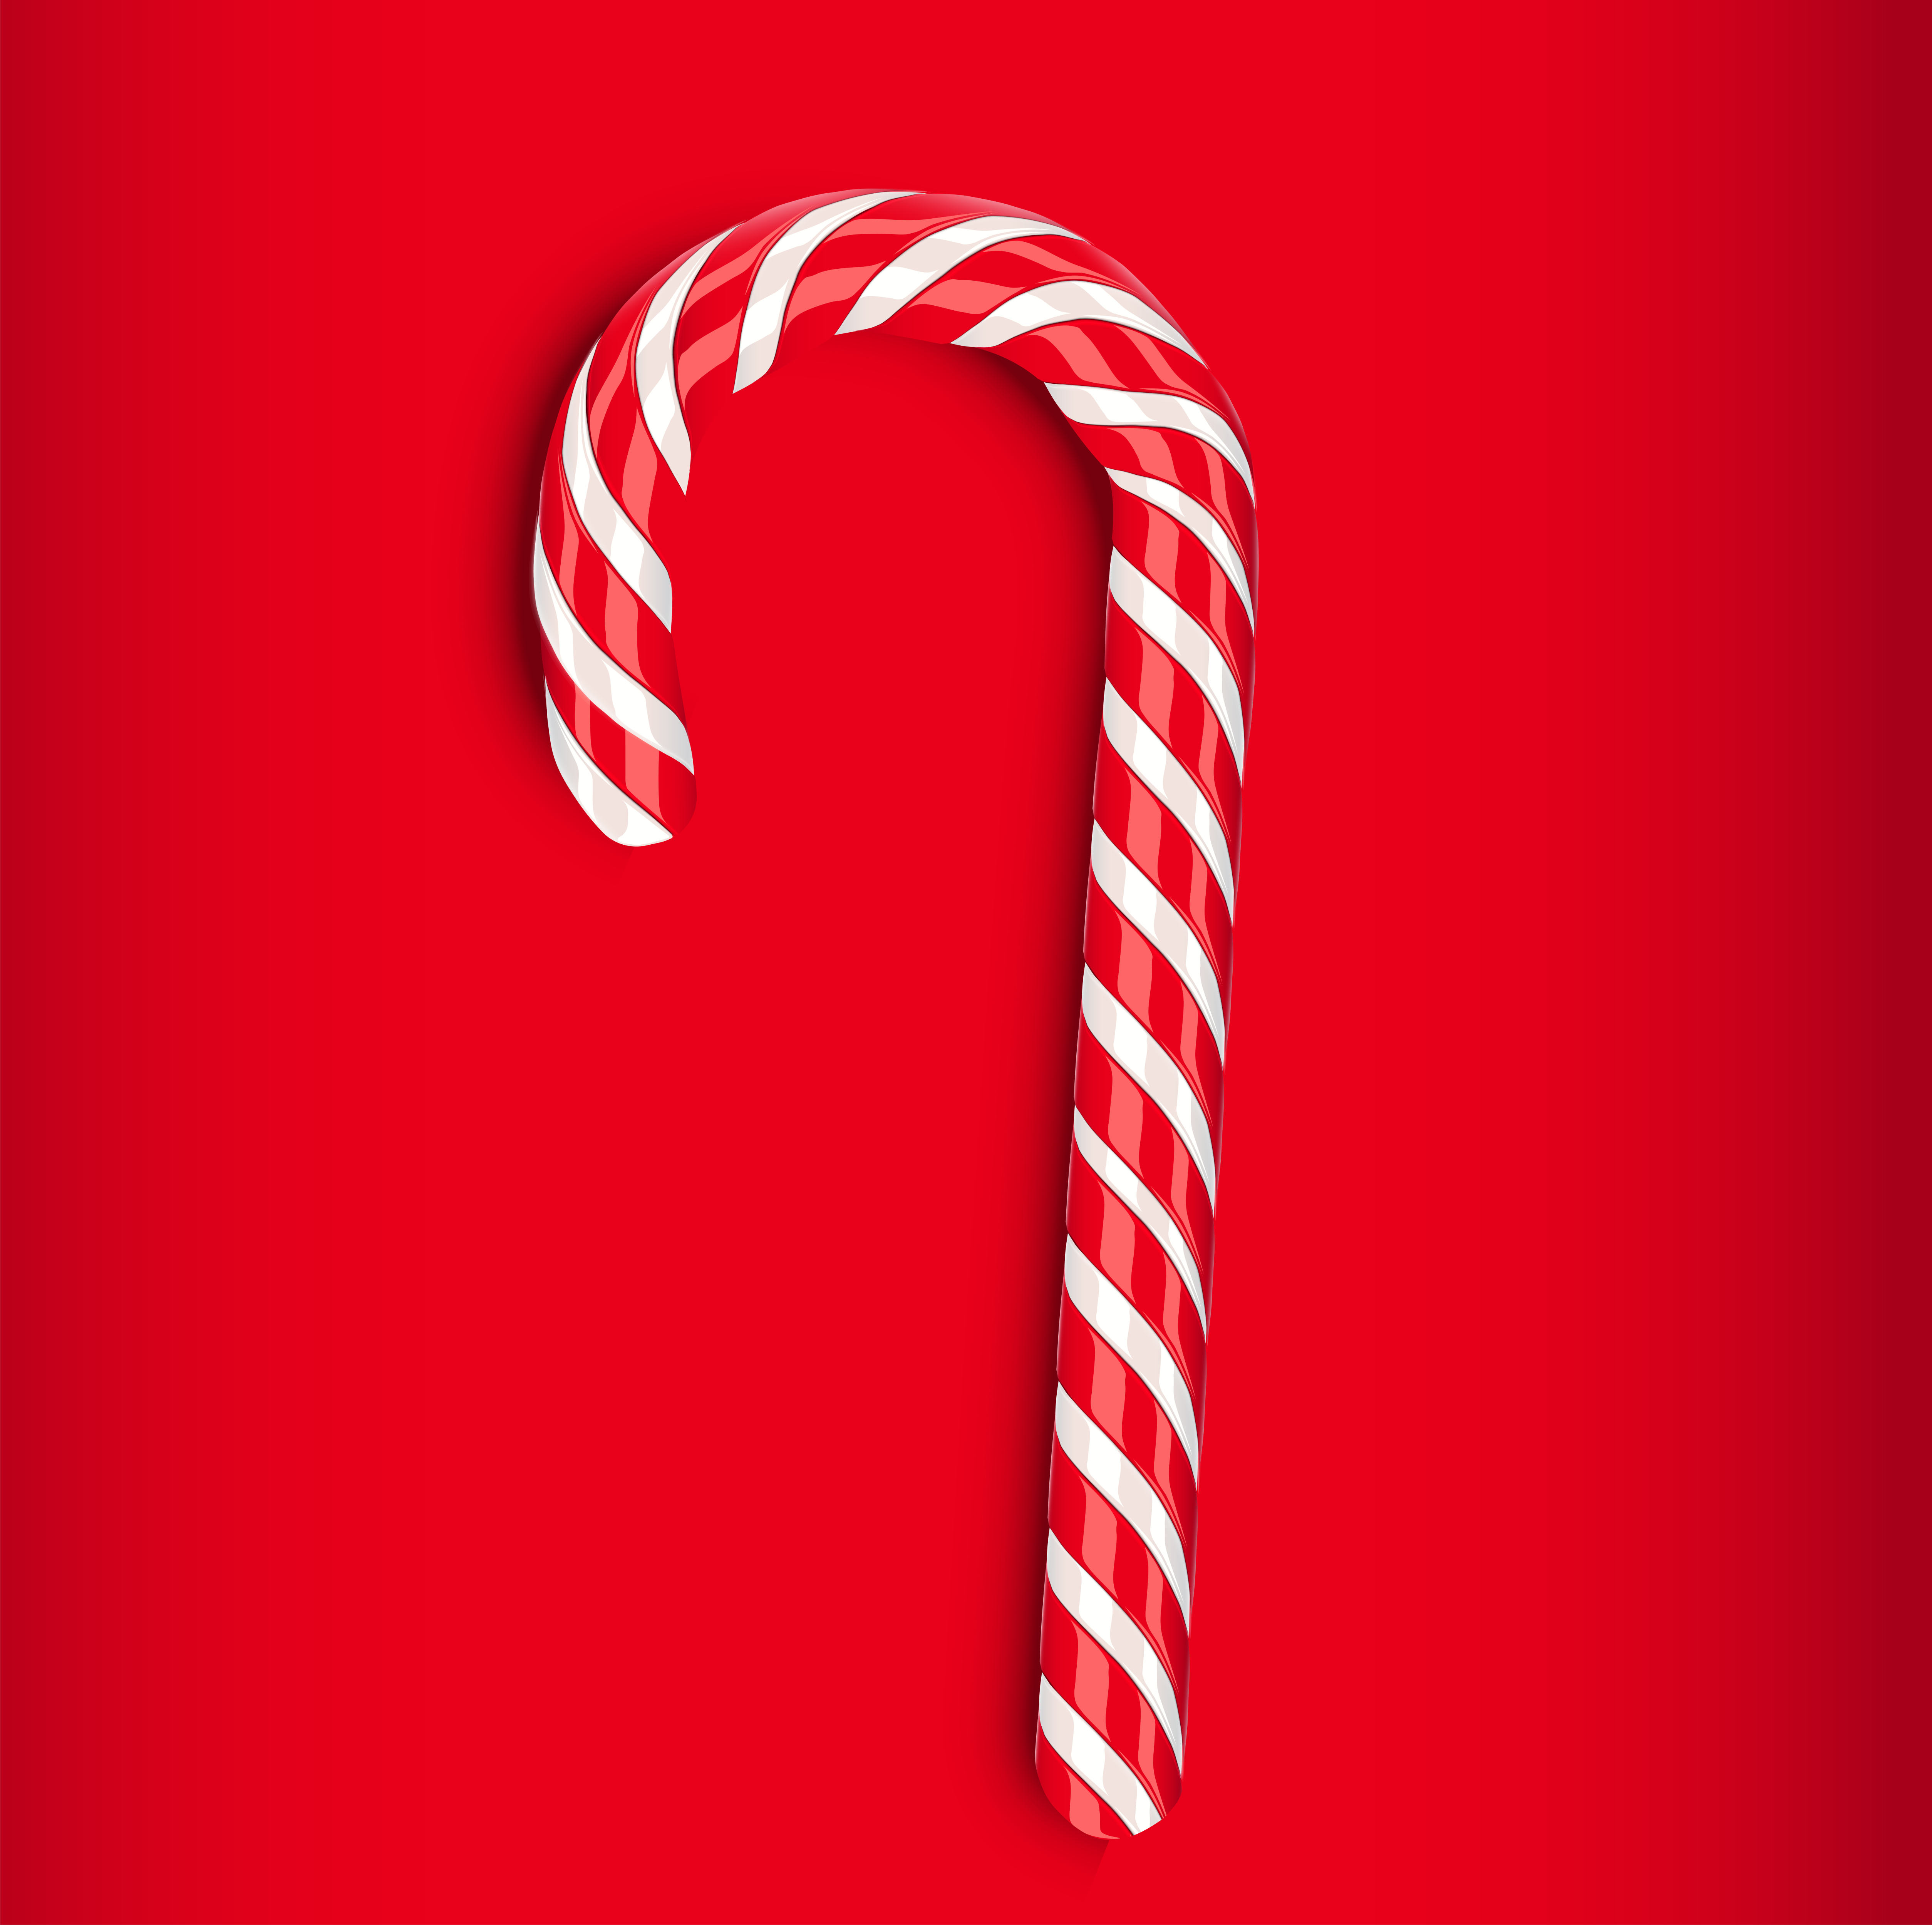 High detailed red candy cane vector illustration 415273 - Download 